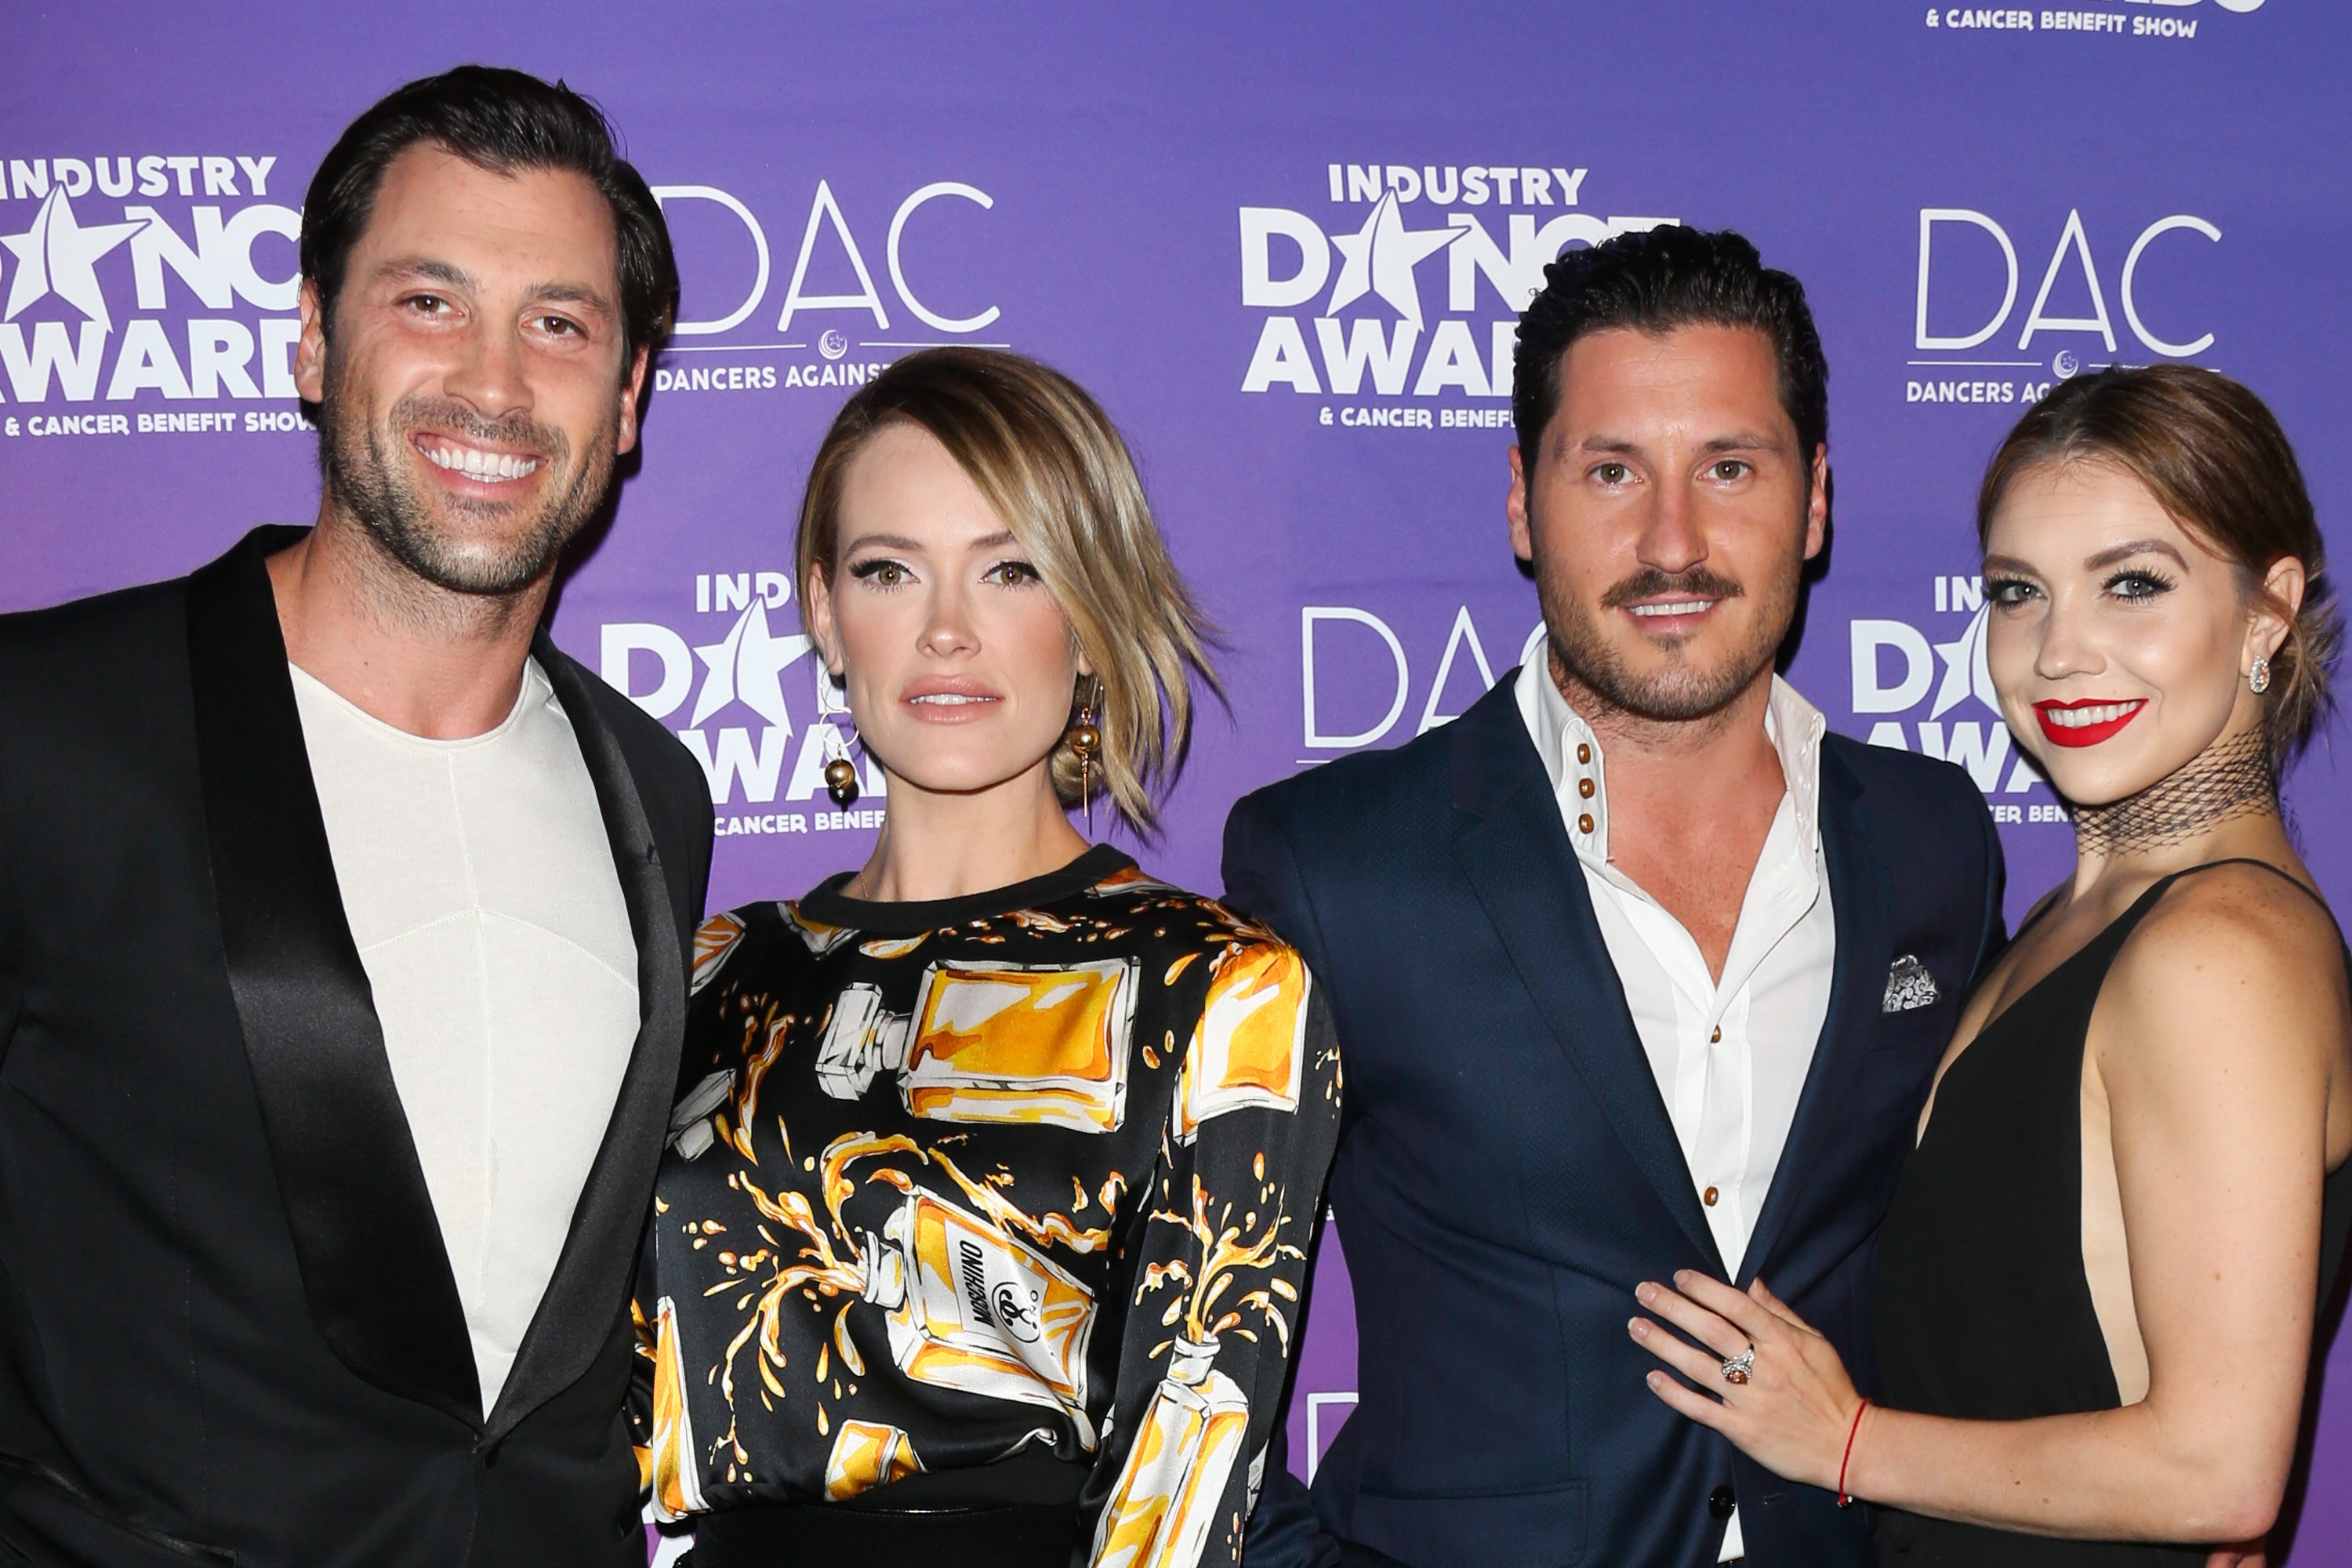 Maksim Chmerkovskiy, Peta Murgatroyd, Val Chmerkovskiy, and Jenna Johnson at the Industry Dance Awards and Cancer Benefit show on August 16, 2017, in Hollywood, California. | Source: Getty Images